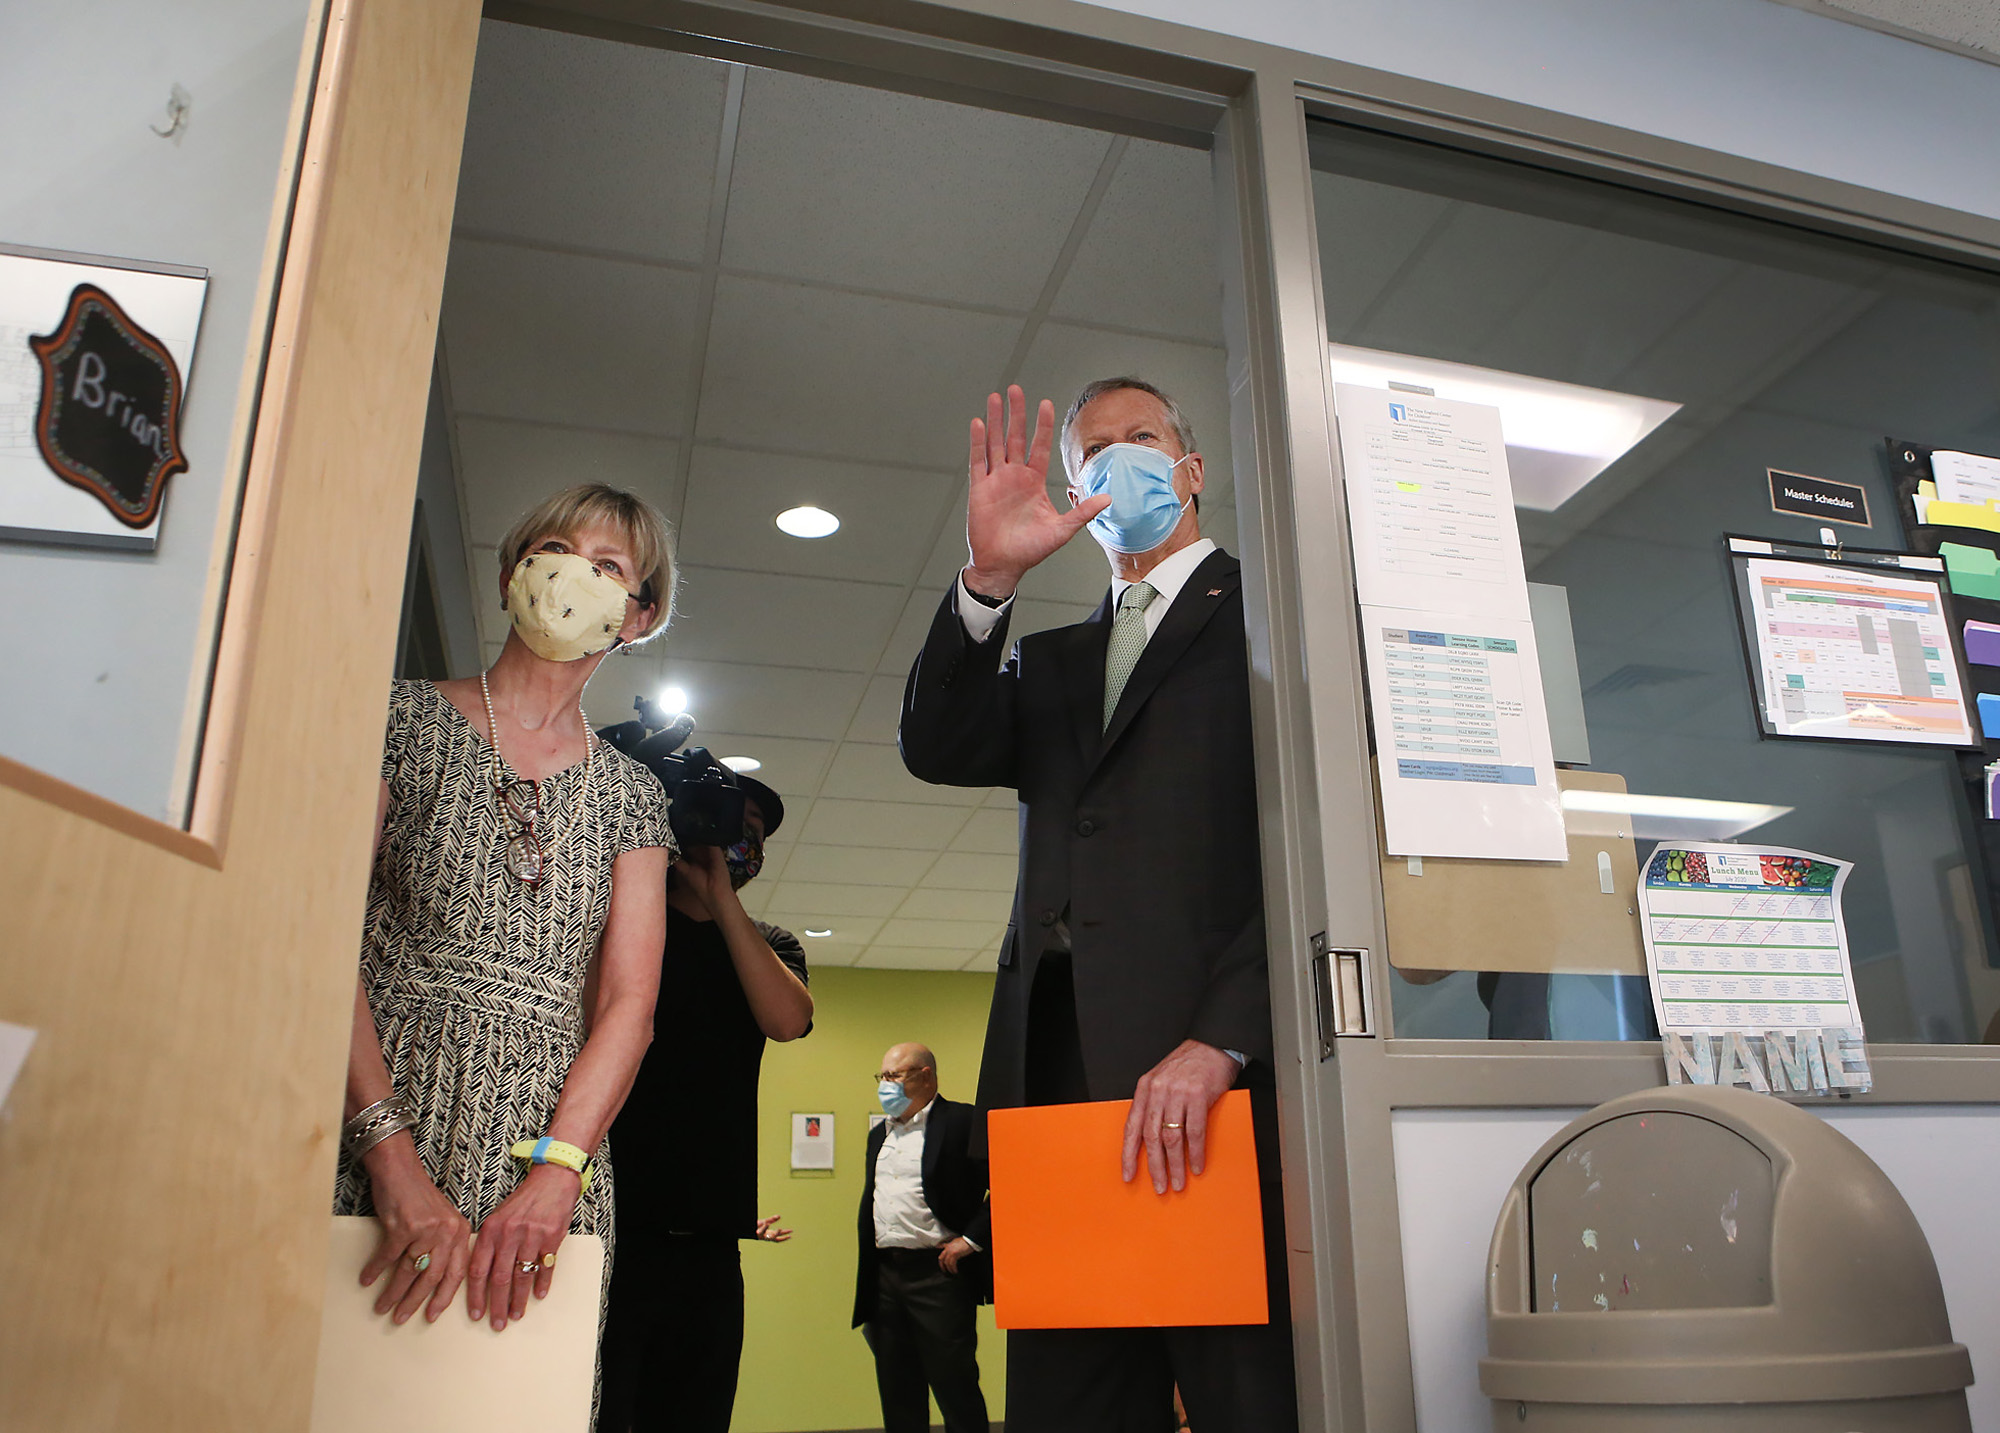 Governor Charlie Baker and Secretary of Health and Human Services Marylou Sudders wave to students through a classroom door as they tour The New England Center for Children on July 13, 2020 in Southborough, Massachusetts. (Photo by Nancy Lane / POOL / AFP) (Photo by NANCY LANE/POOL/AFP via Getty Images)